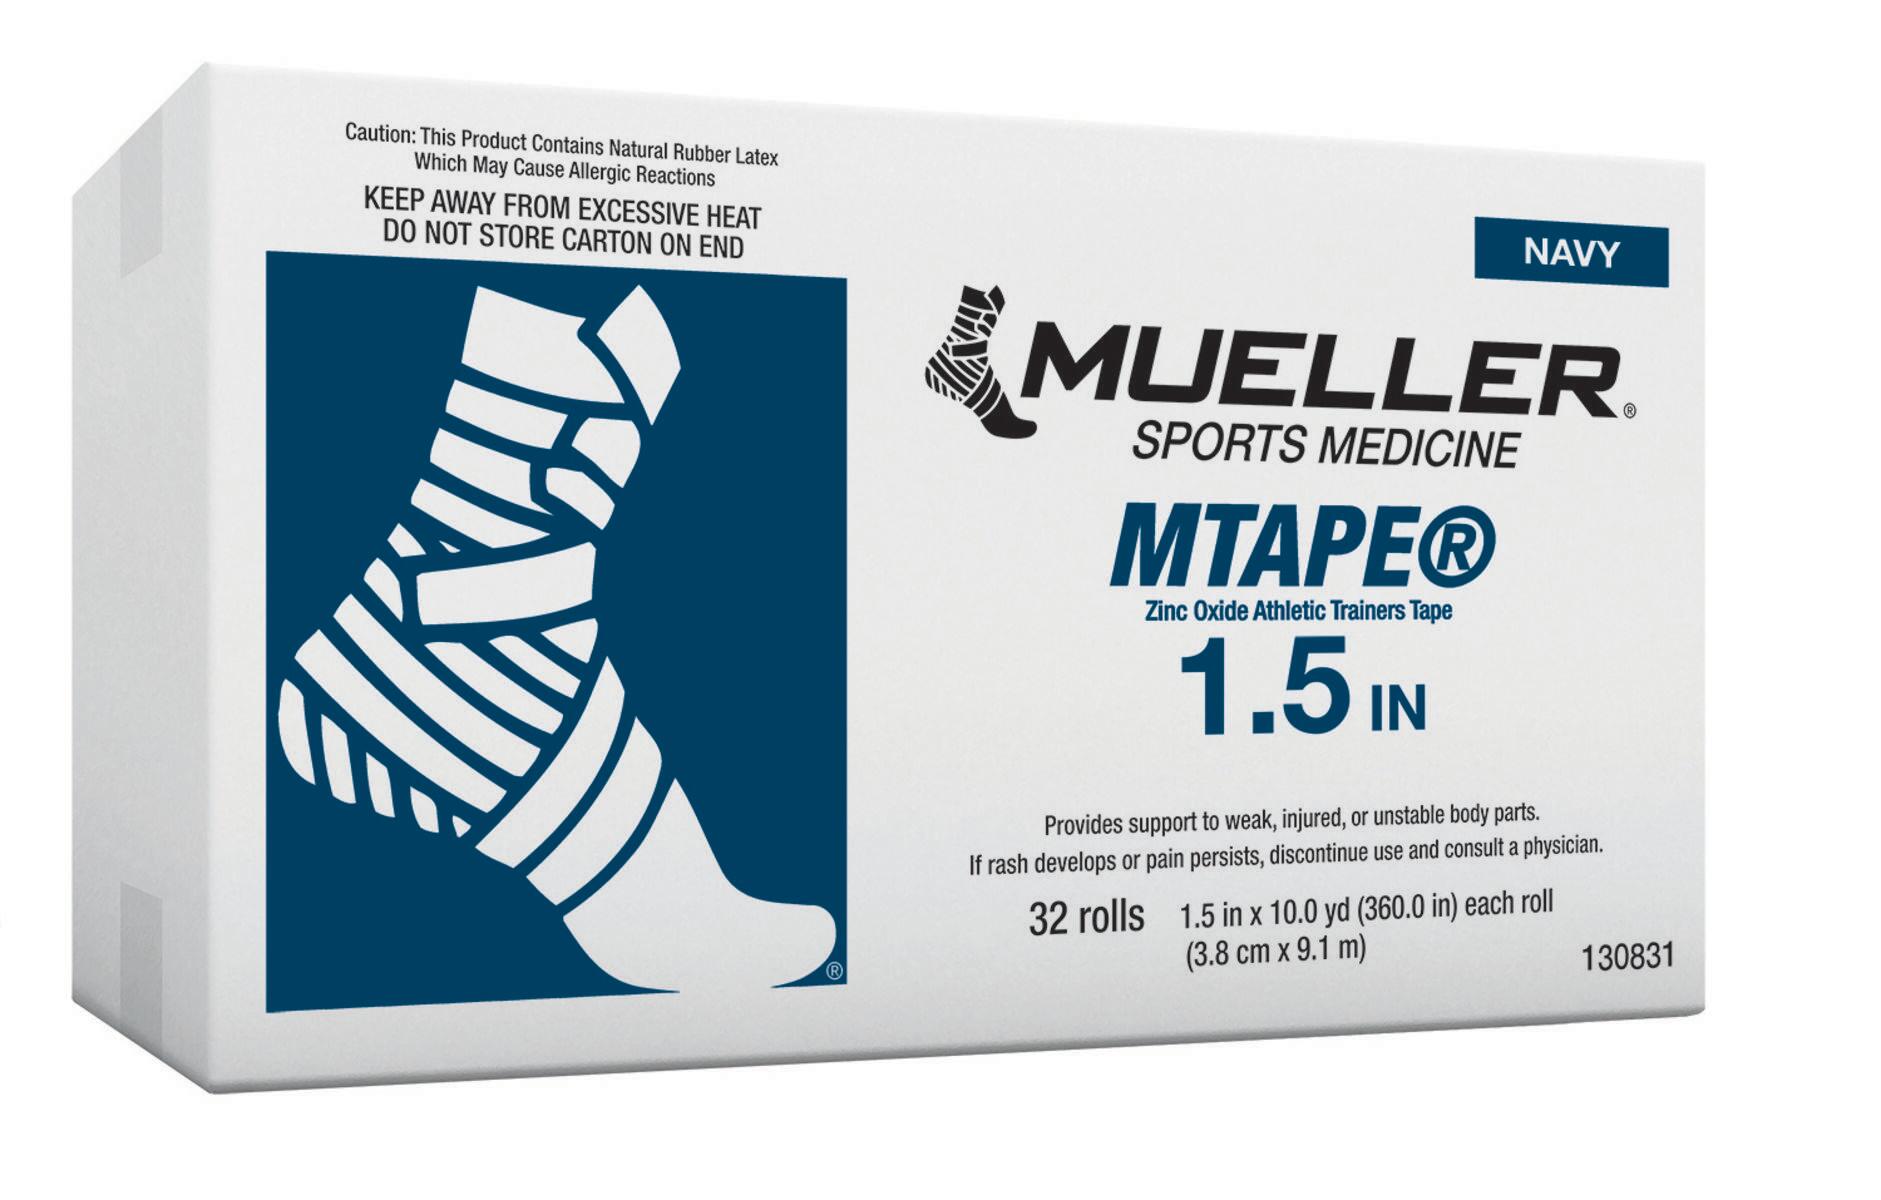 Mueller Kinesiology Muscle Support M Tape Navy Blue 3.8cm x 9.14m - x32 1/2